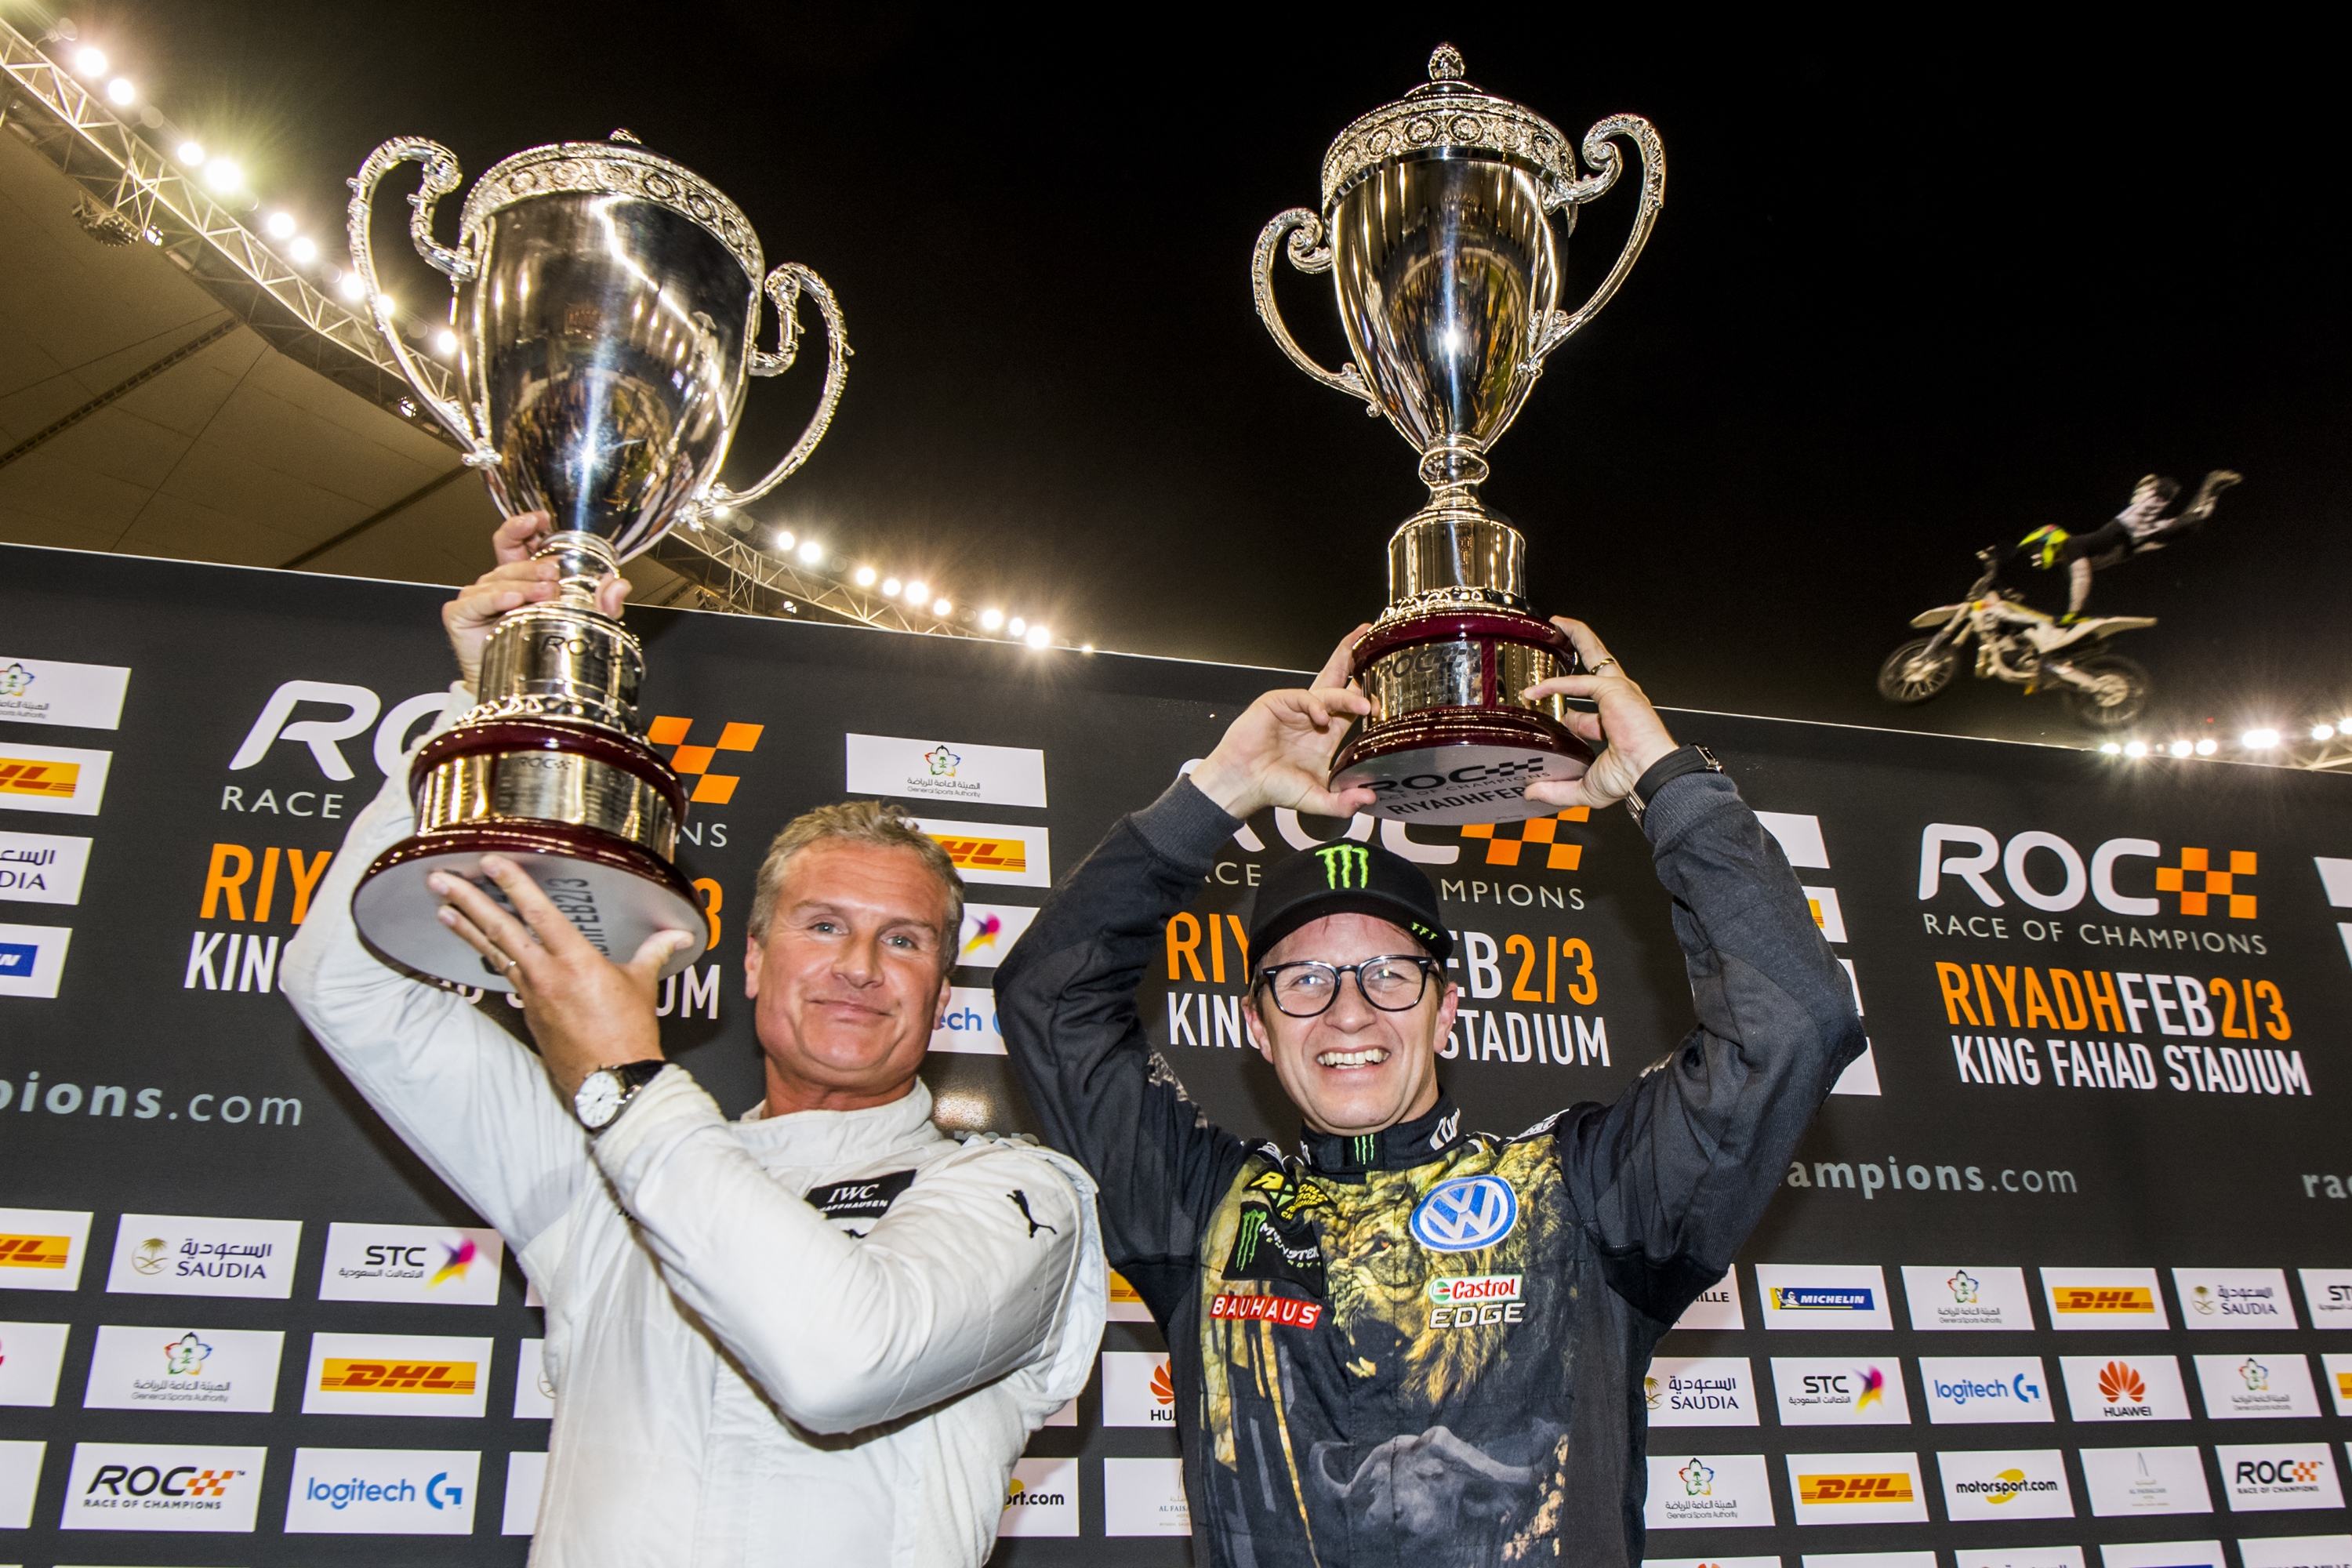 david_coulthard_gbr_celebrates_his_win_with_petter_solberg_nor_on_the_podium_during_the_race_of_champions_on_saturday_3_february_2018_at_king_fahad_stadium_riyadh_saudi_arabia.JPG